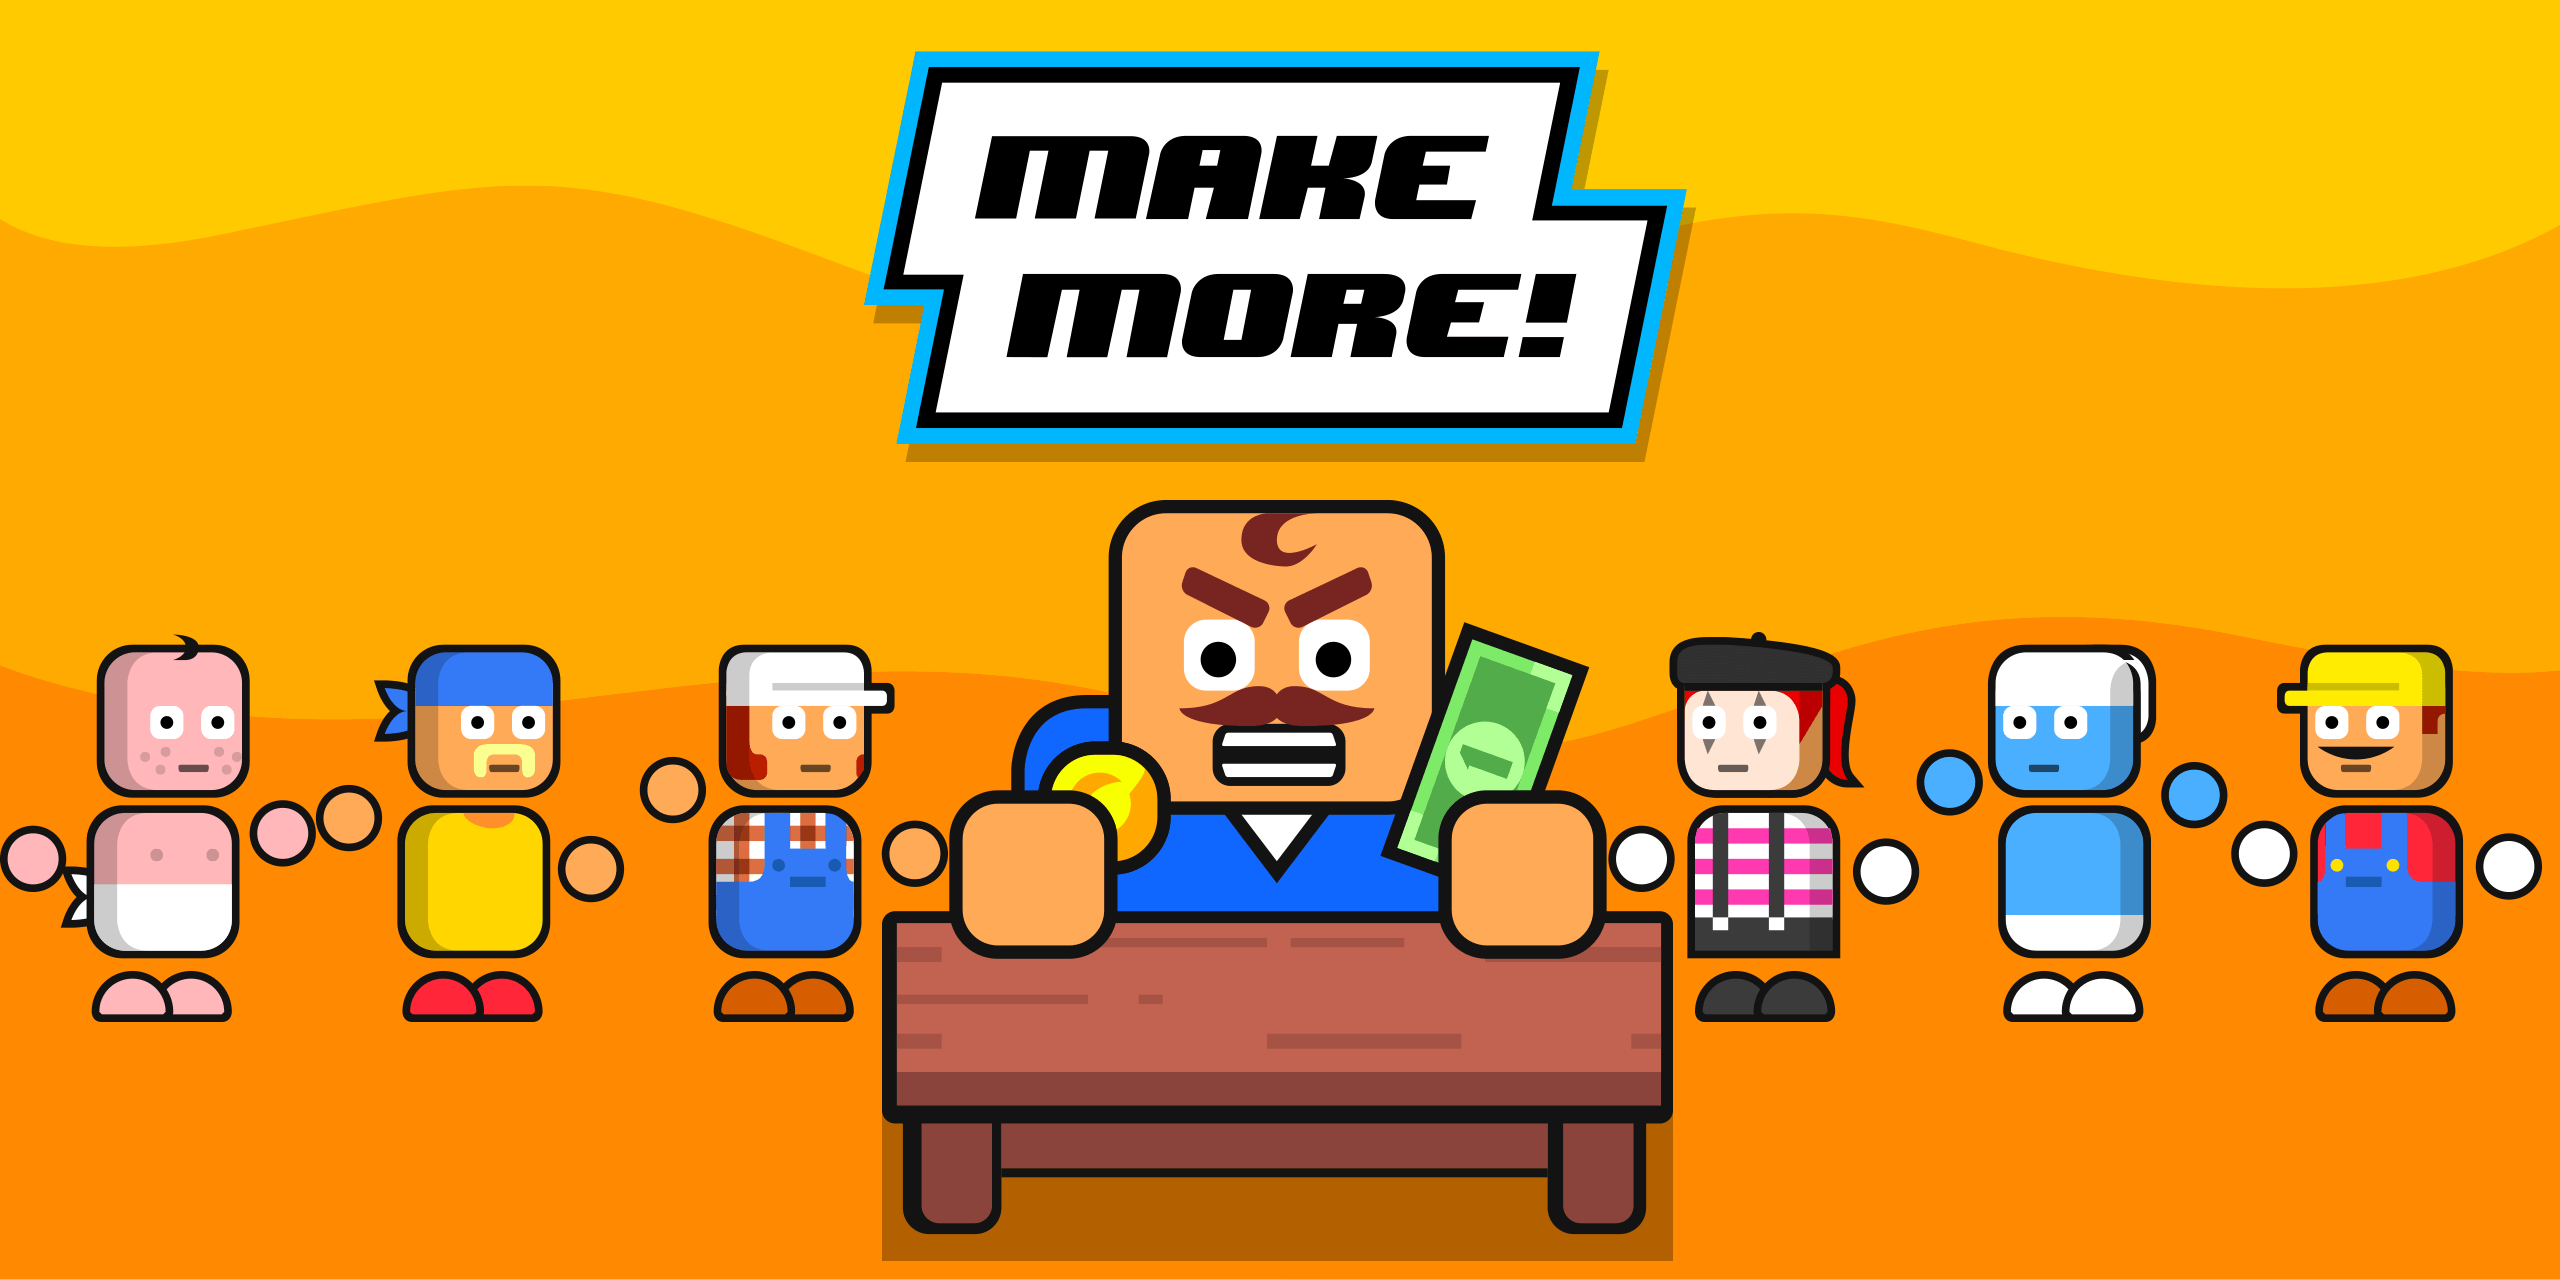 MAKE MORE! IDLE MANAGER